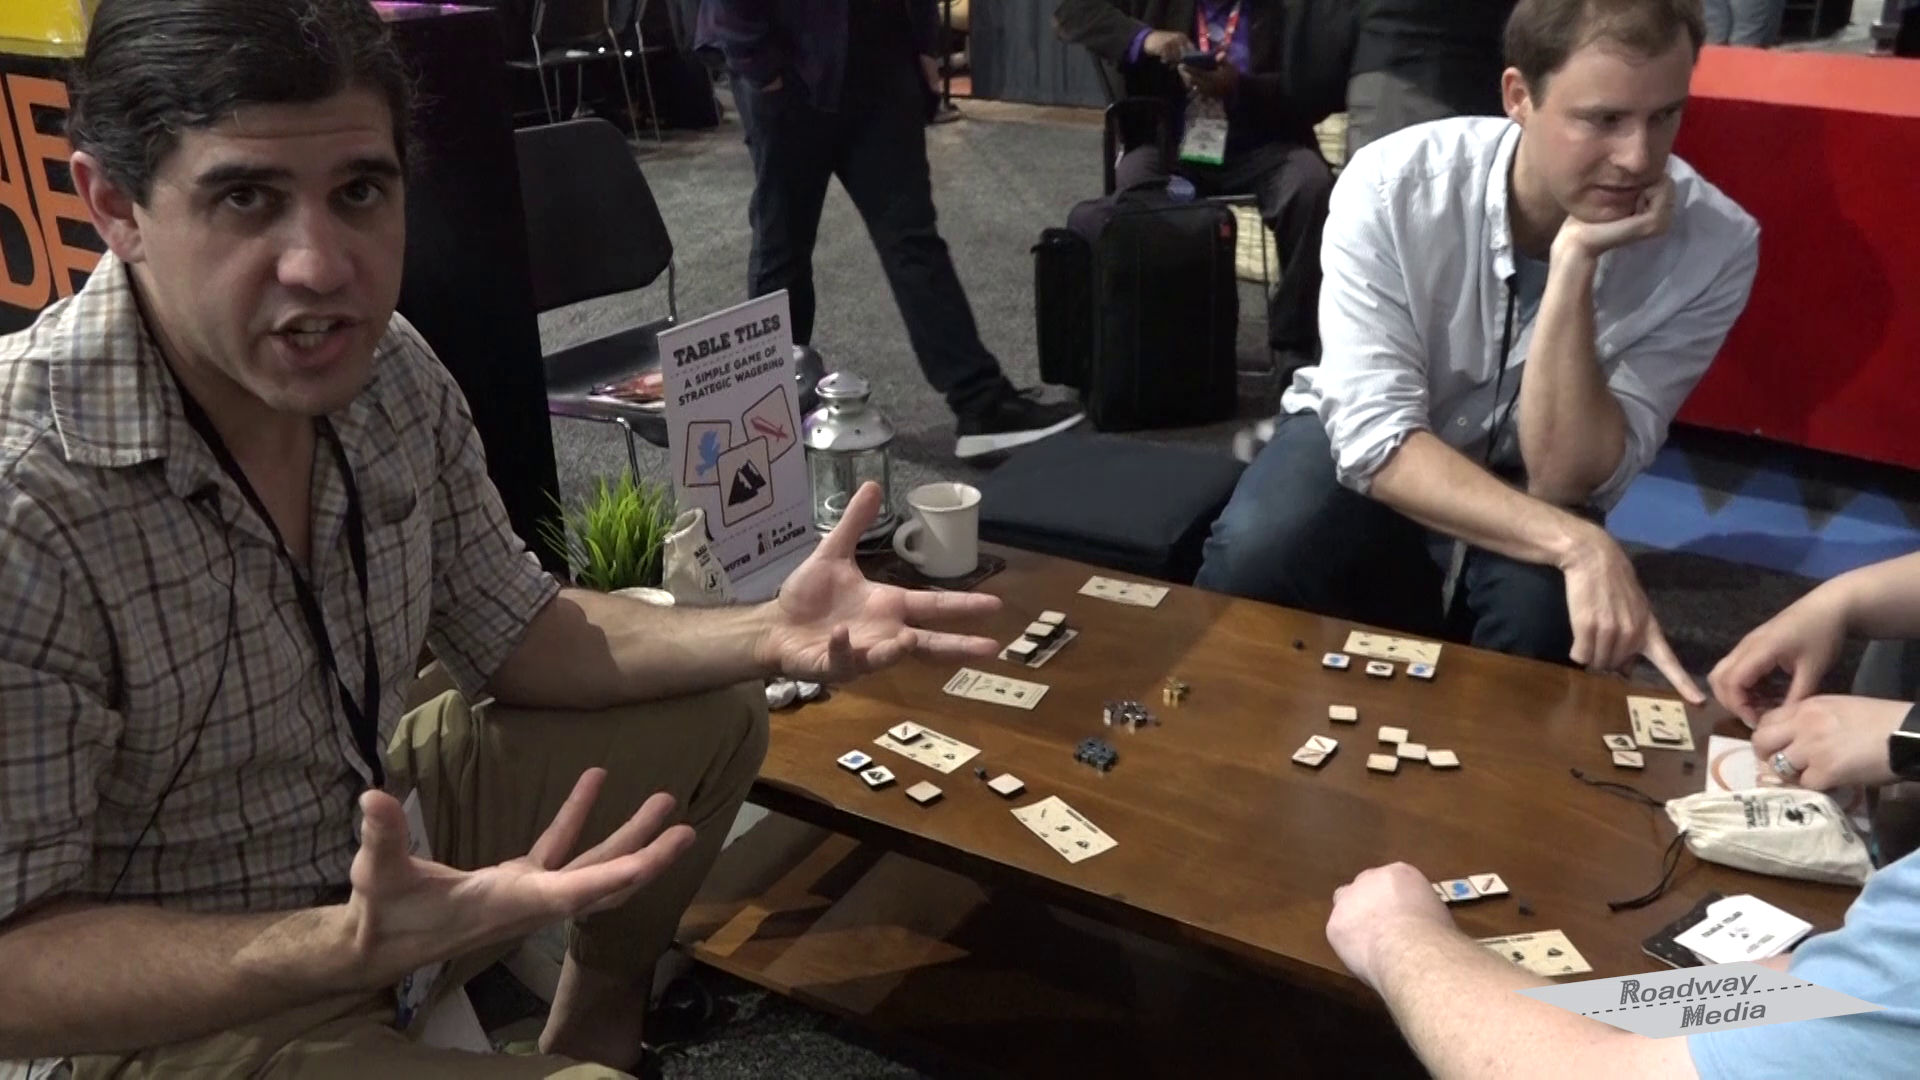 Table Tiles makes perfect outdoor game at E3